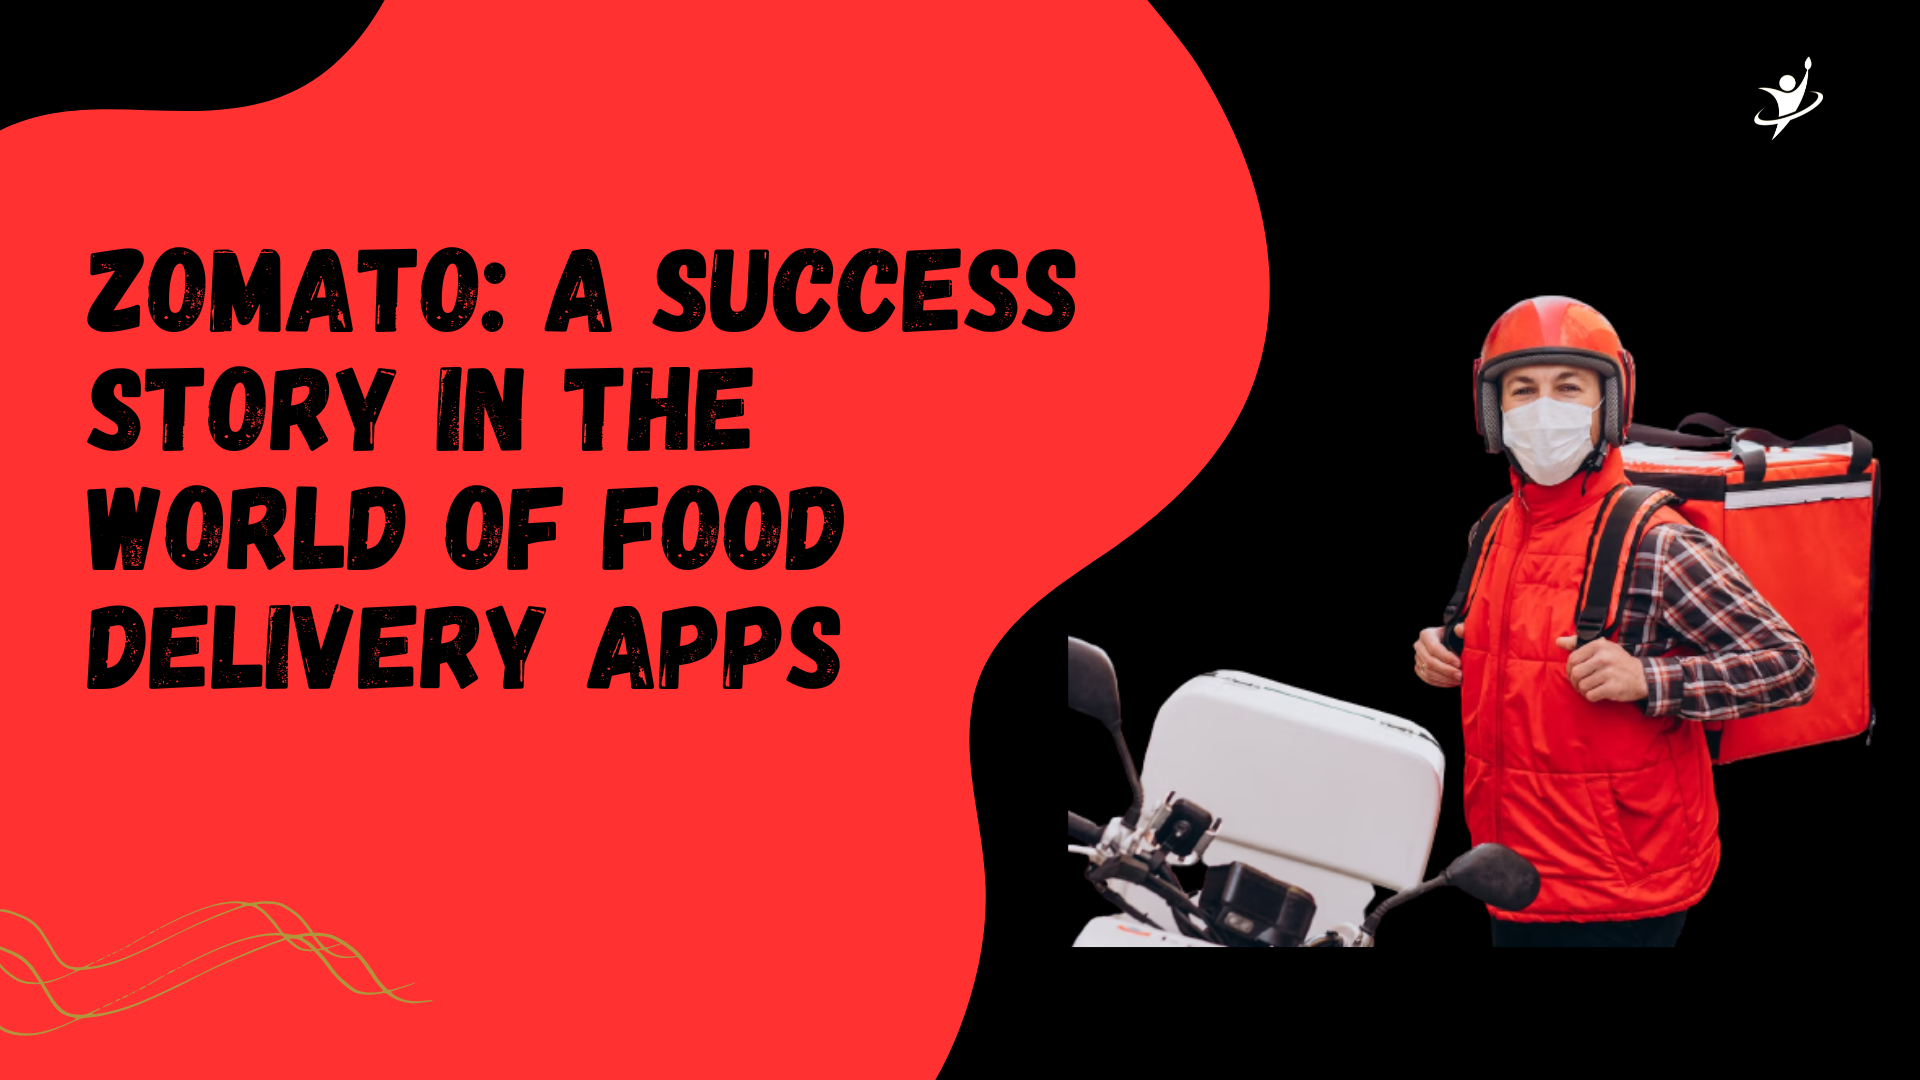 Zomato: A Success Story in the World of Food Delivery Apps